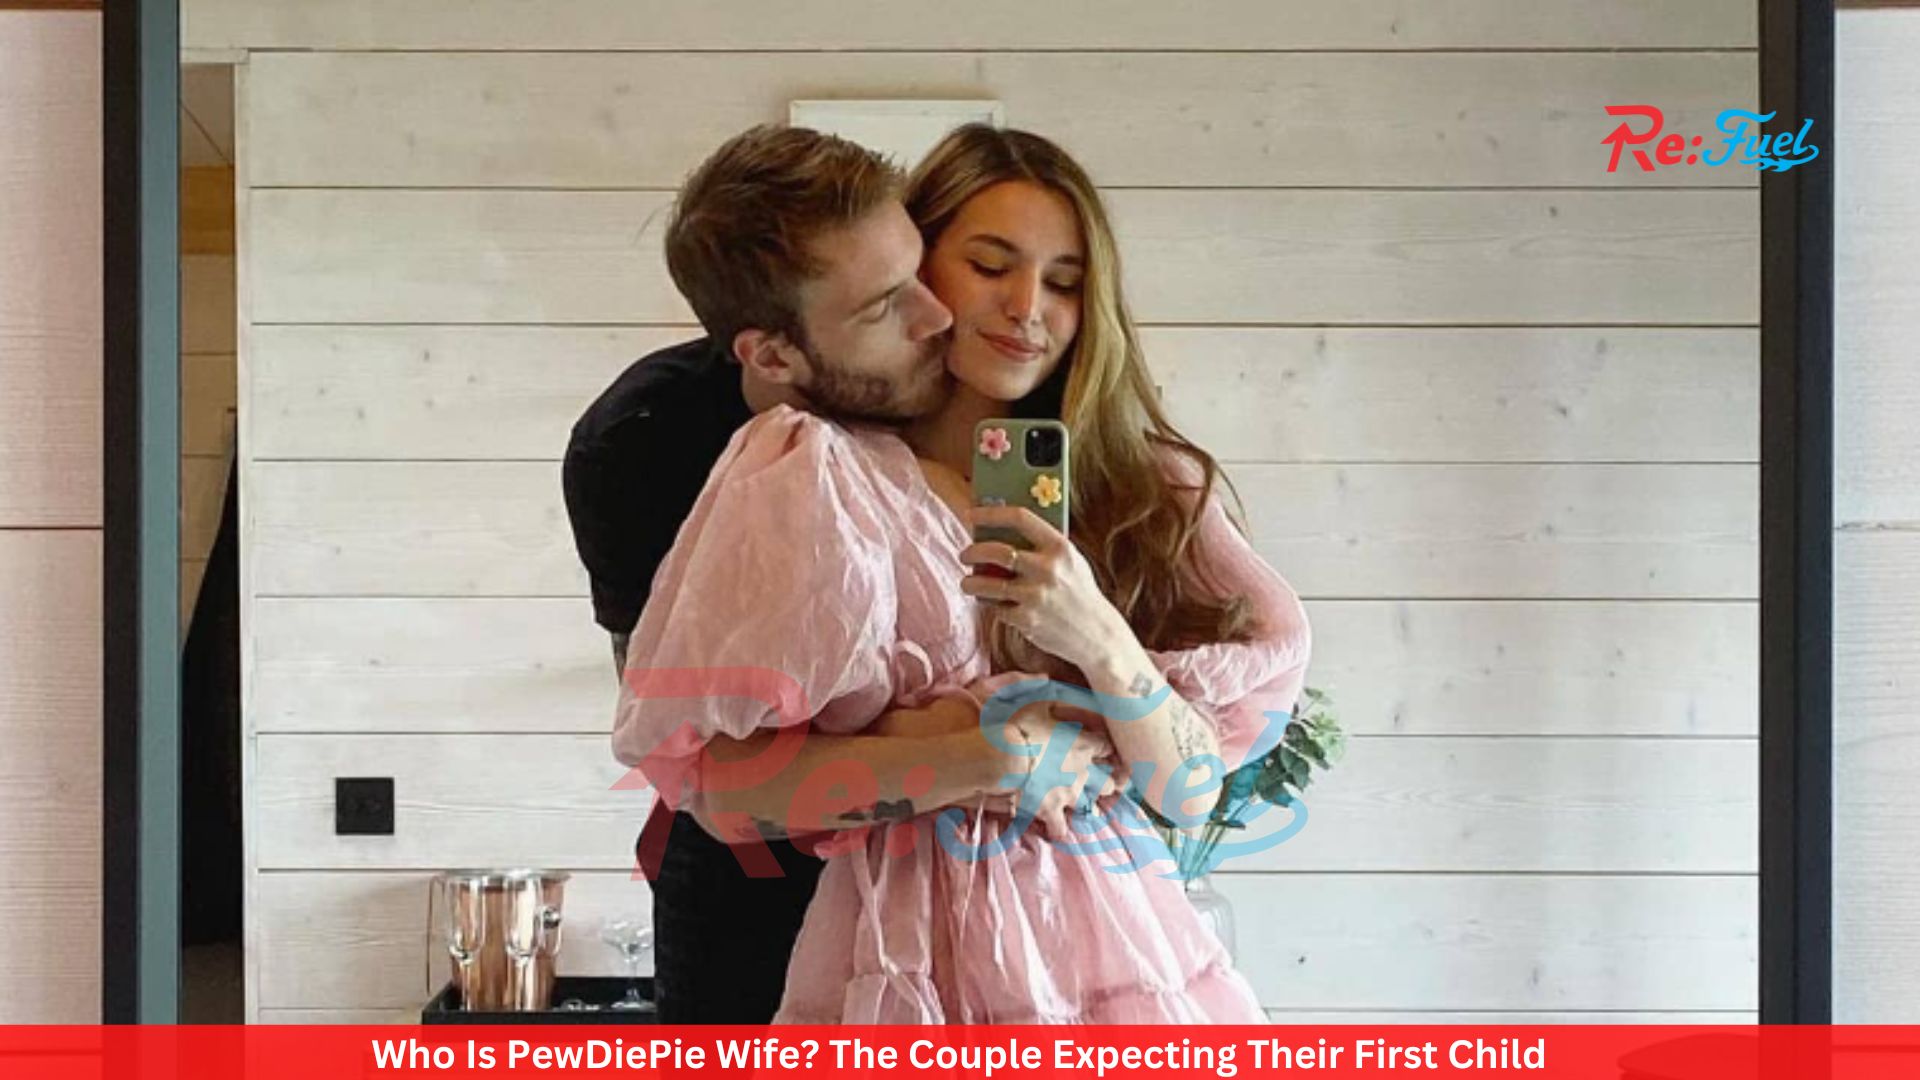 Who Is PewDiePie Wife? The Couple Expecting Their First Child